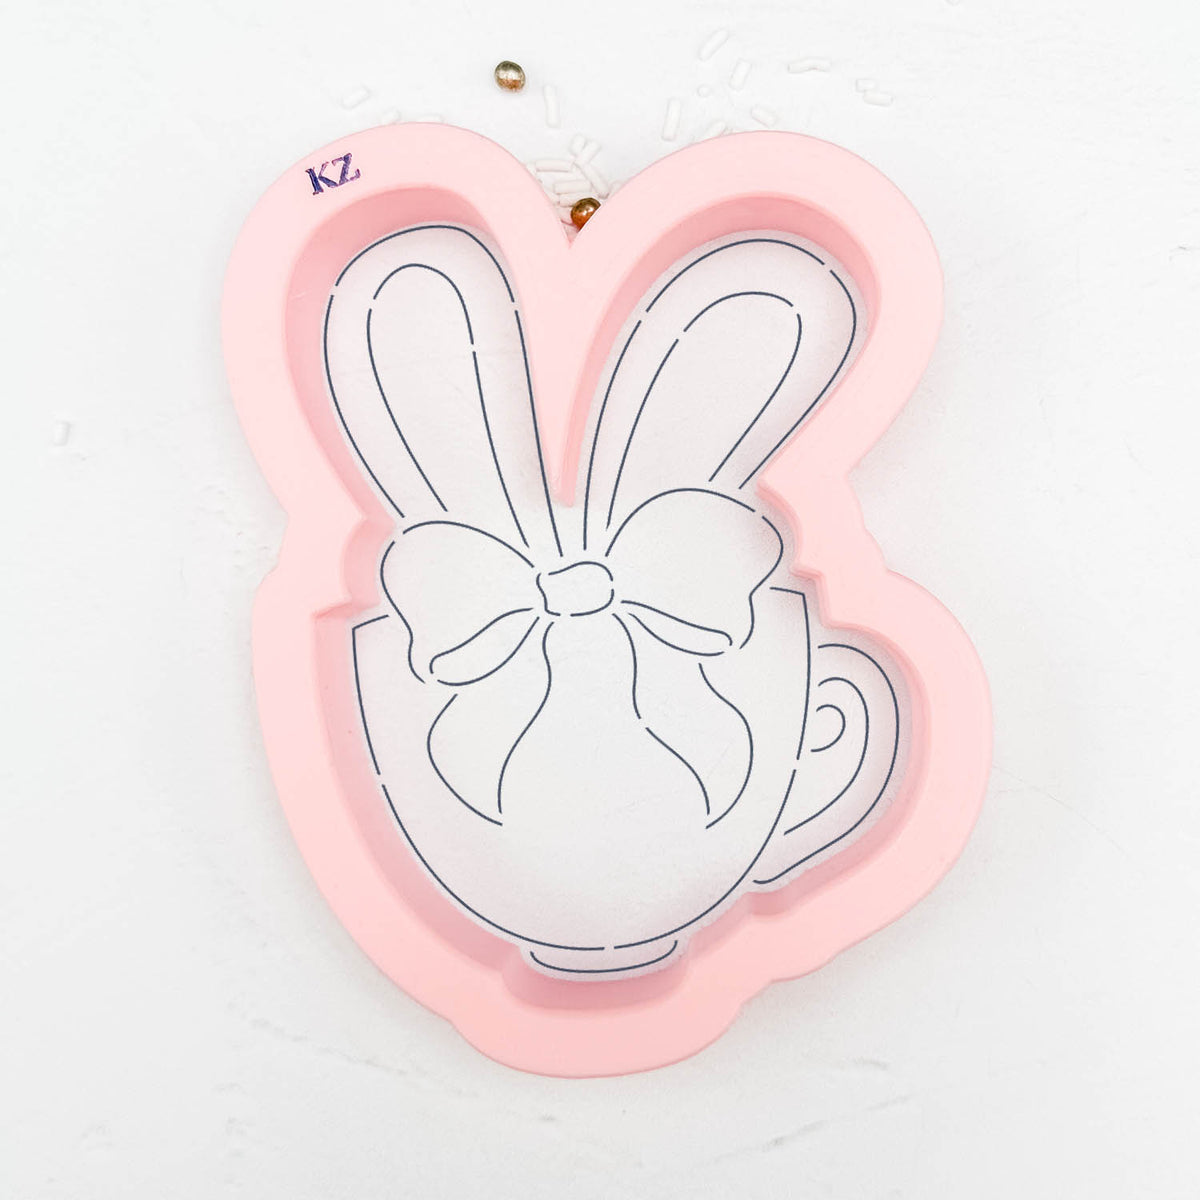 Cookie Cutters Teacup Bunny Ears Cutter/Stencil